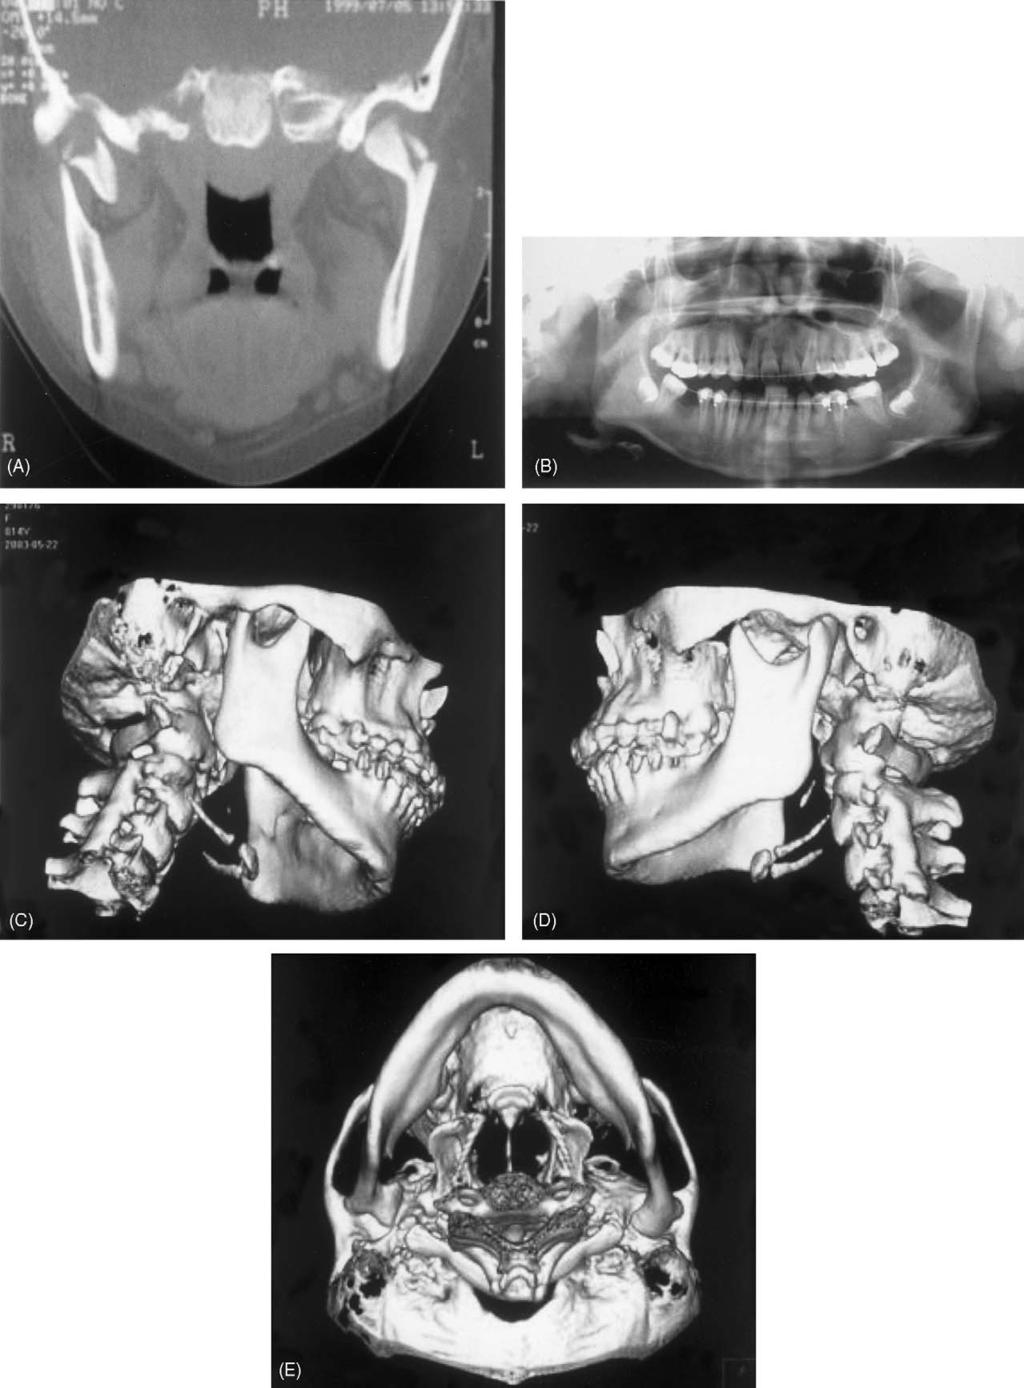 856 Choi et al. Fig. 5. TMJ images of a 15-year-old female who sustained a dislocated high condyle neck fracture of the right and displaced high condyle neck fracture of the left at the age of 11.